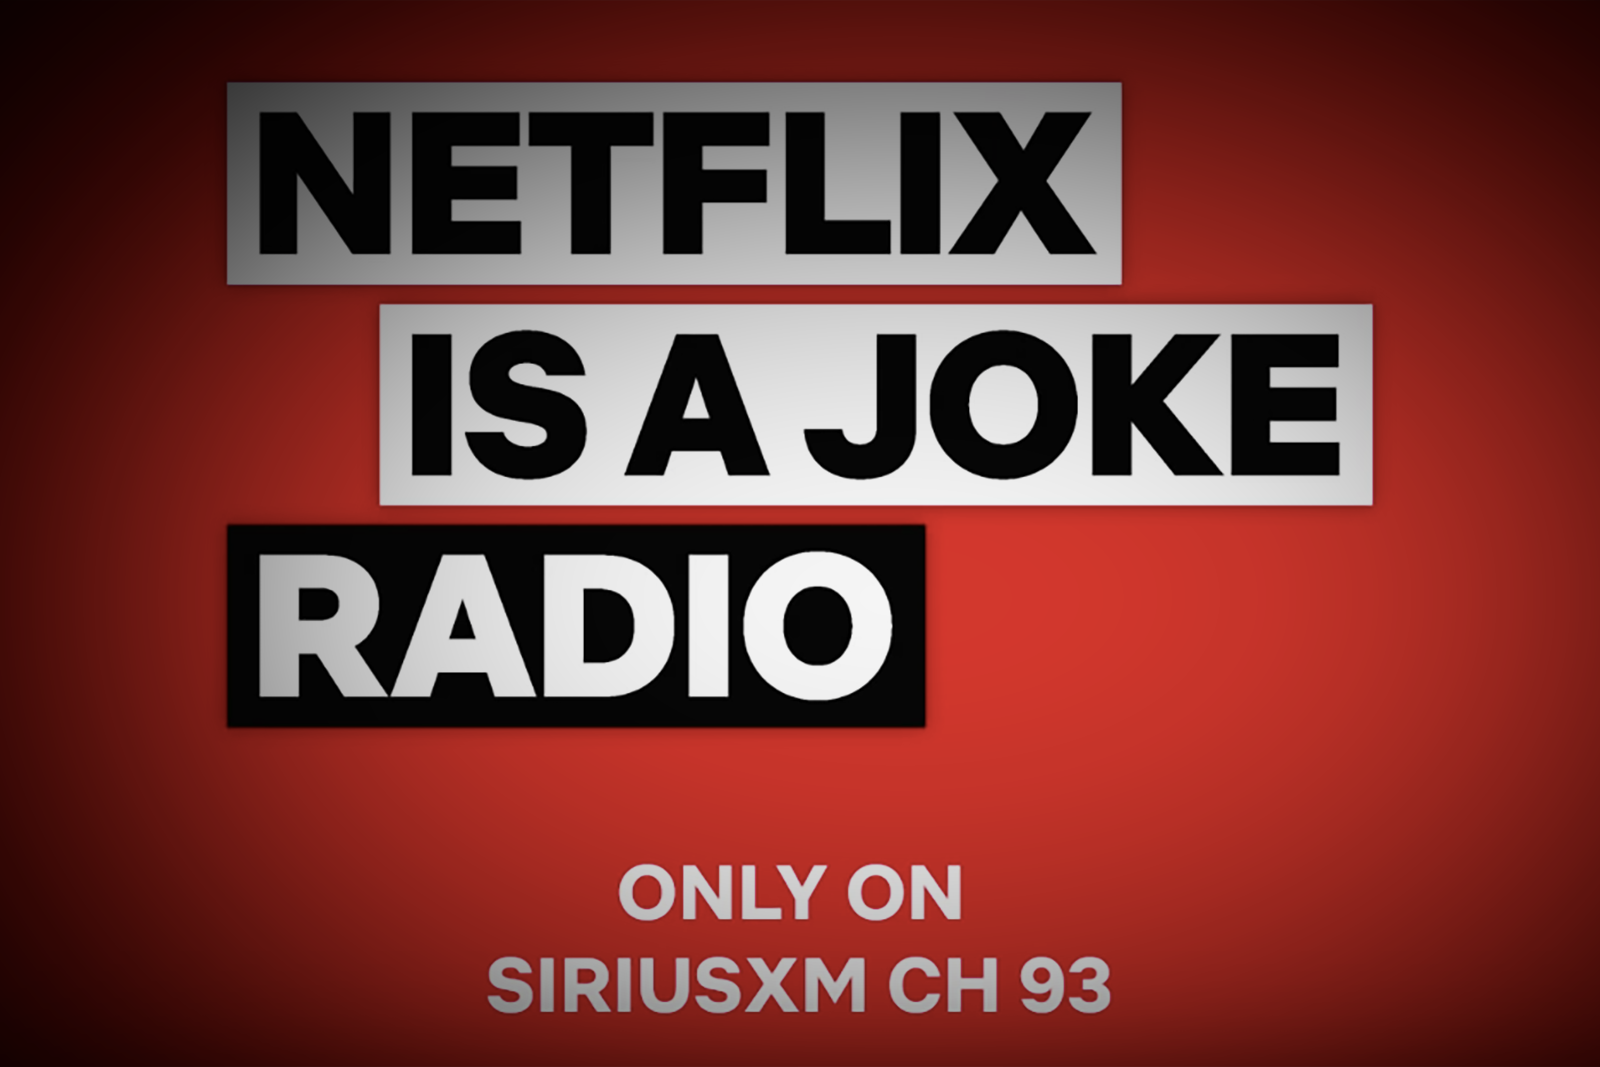 Netflix tries satellite radio with new Netflix is a Joke comedy channel image 1